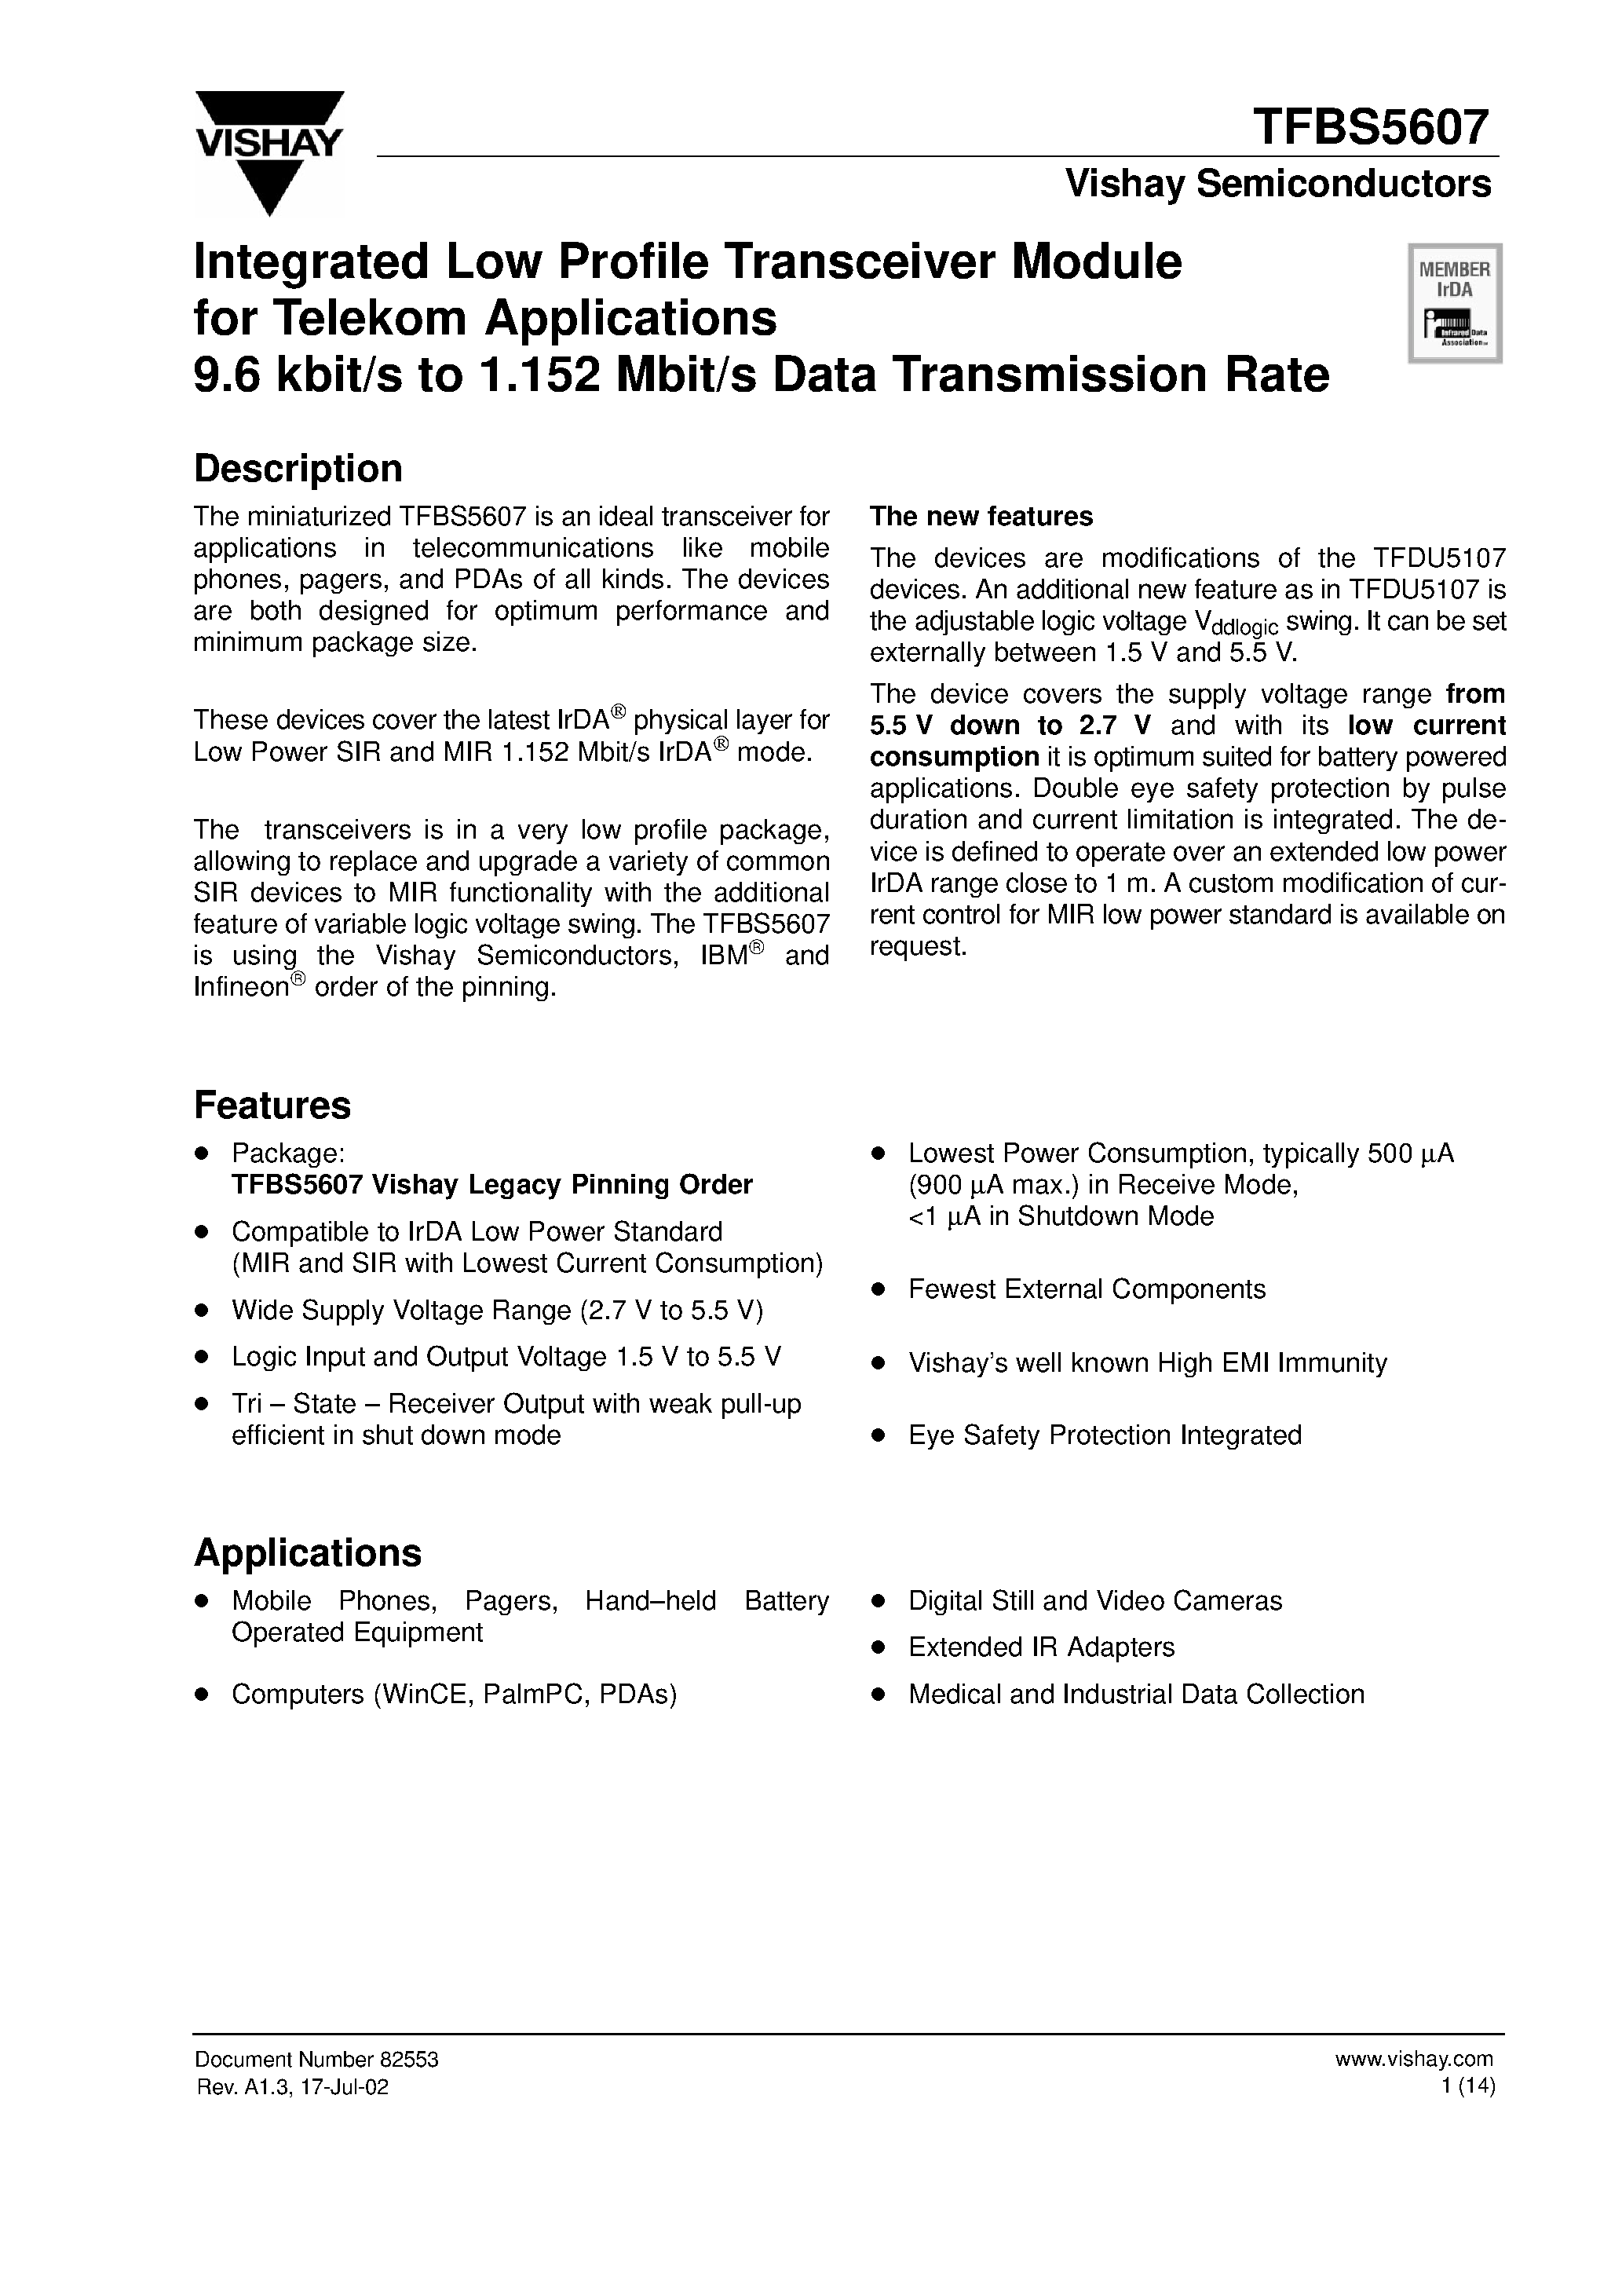 Даташит TFBS5607 - Integrated Low Profile Transceiver Module for Telekom Applications 9.6 kbit/s to 1.152 Mbit/s Data Transmission Rate страница 1